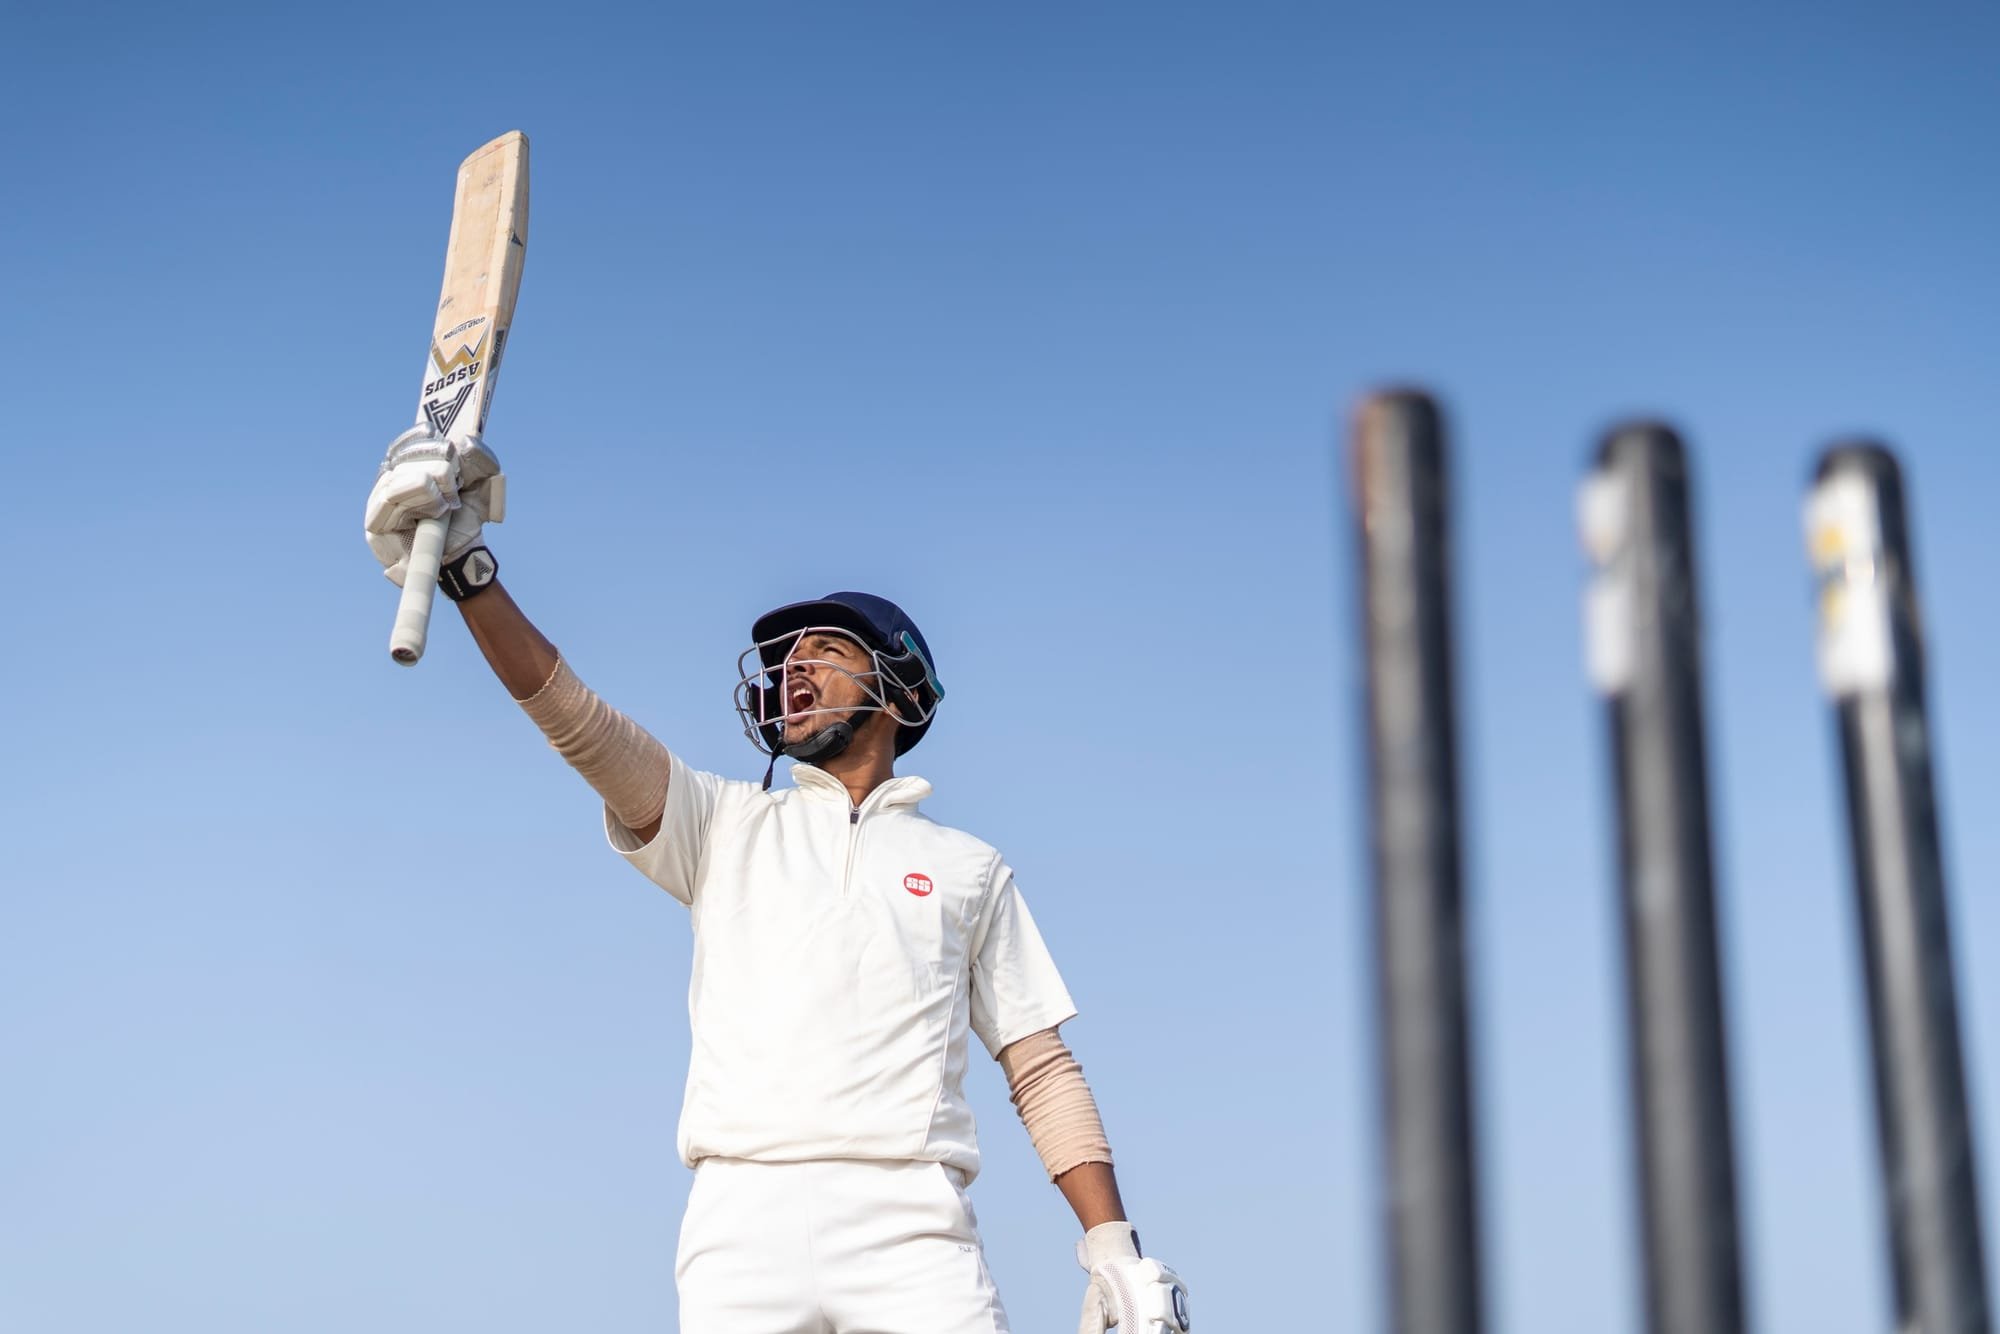 Win a free summer of cricket!